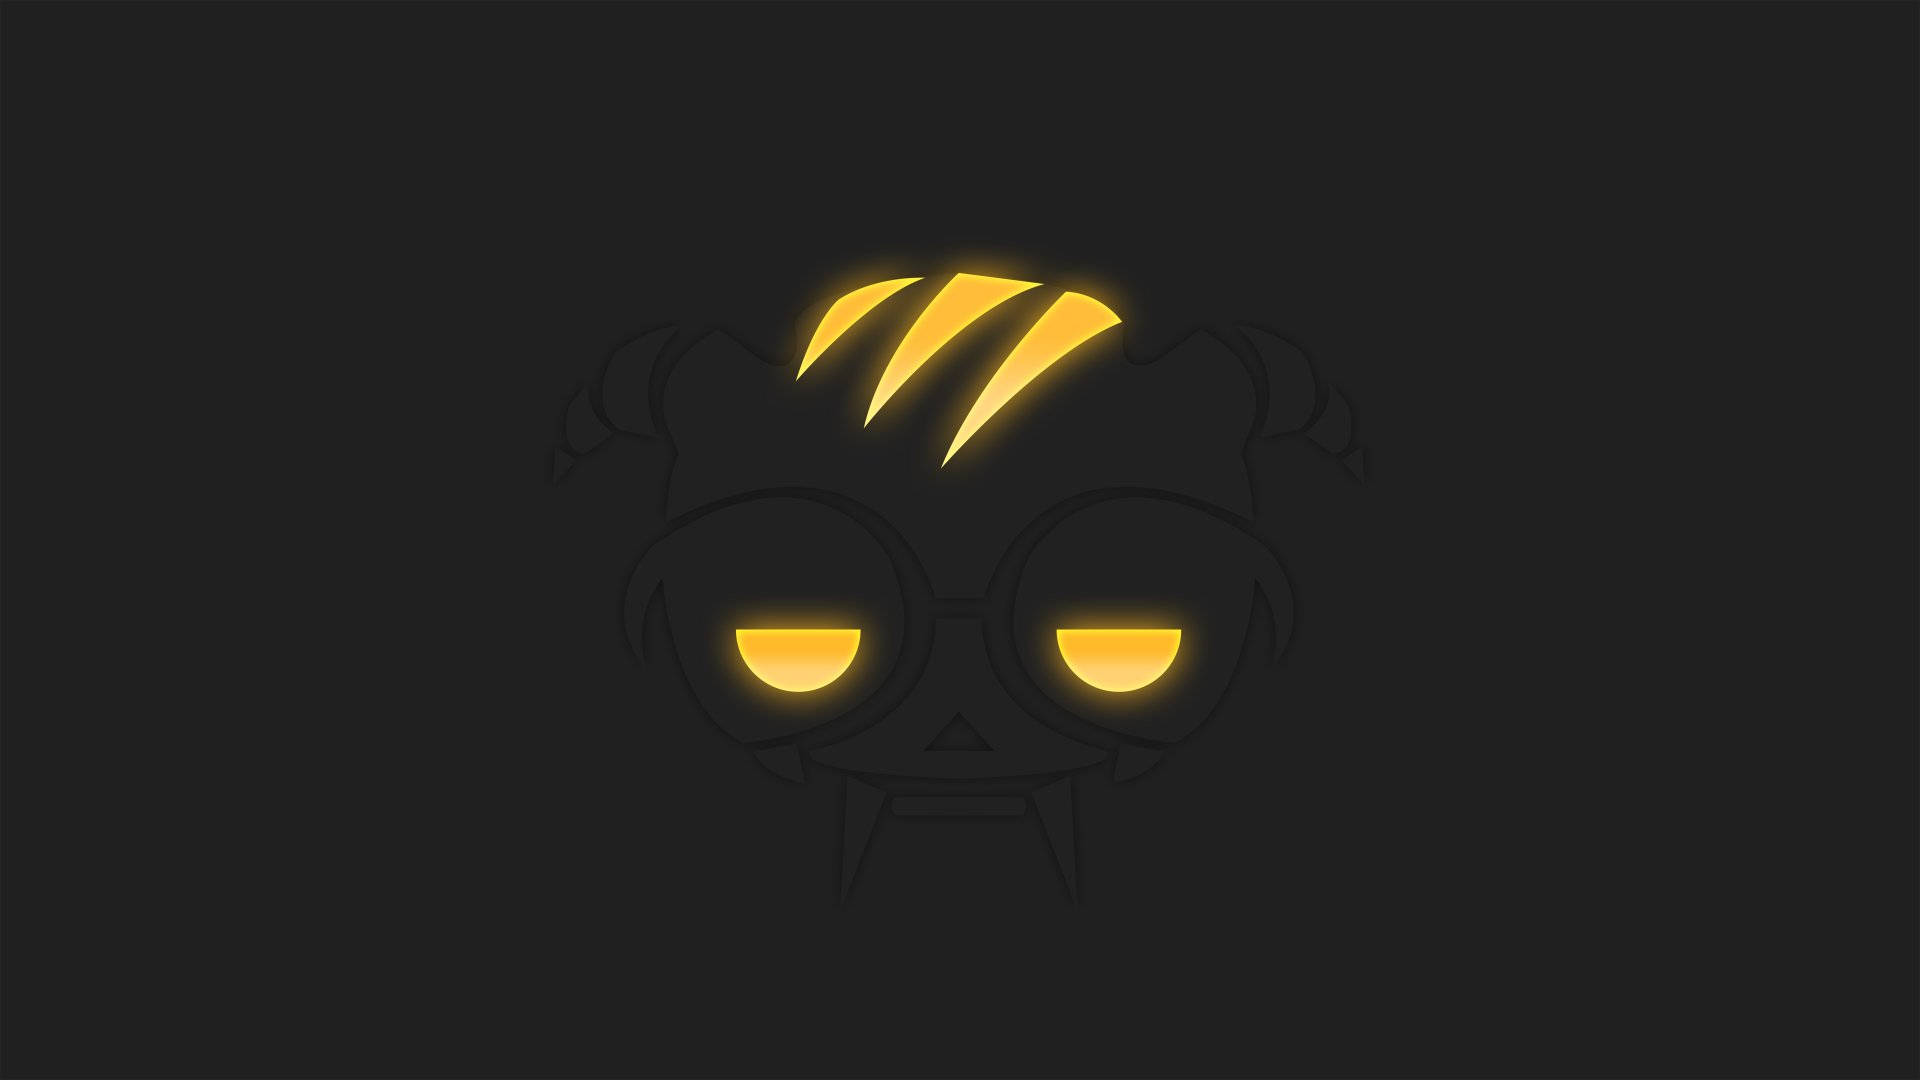 Wind up your gamers library and add Rainbow Six Siege's Dokkaebi Icon Art to your wall. Wallpaper